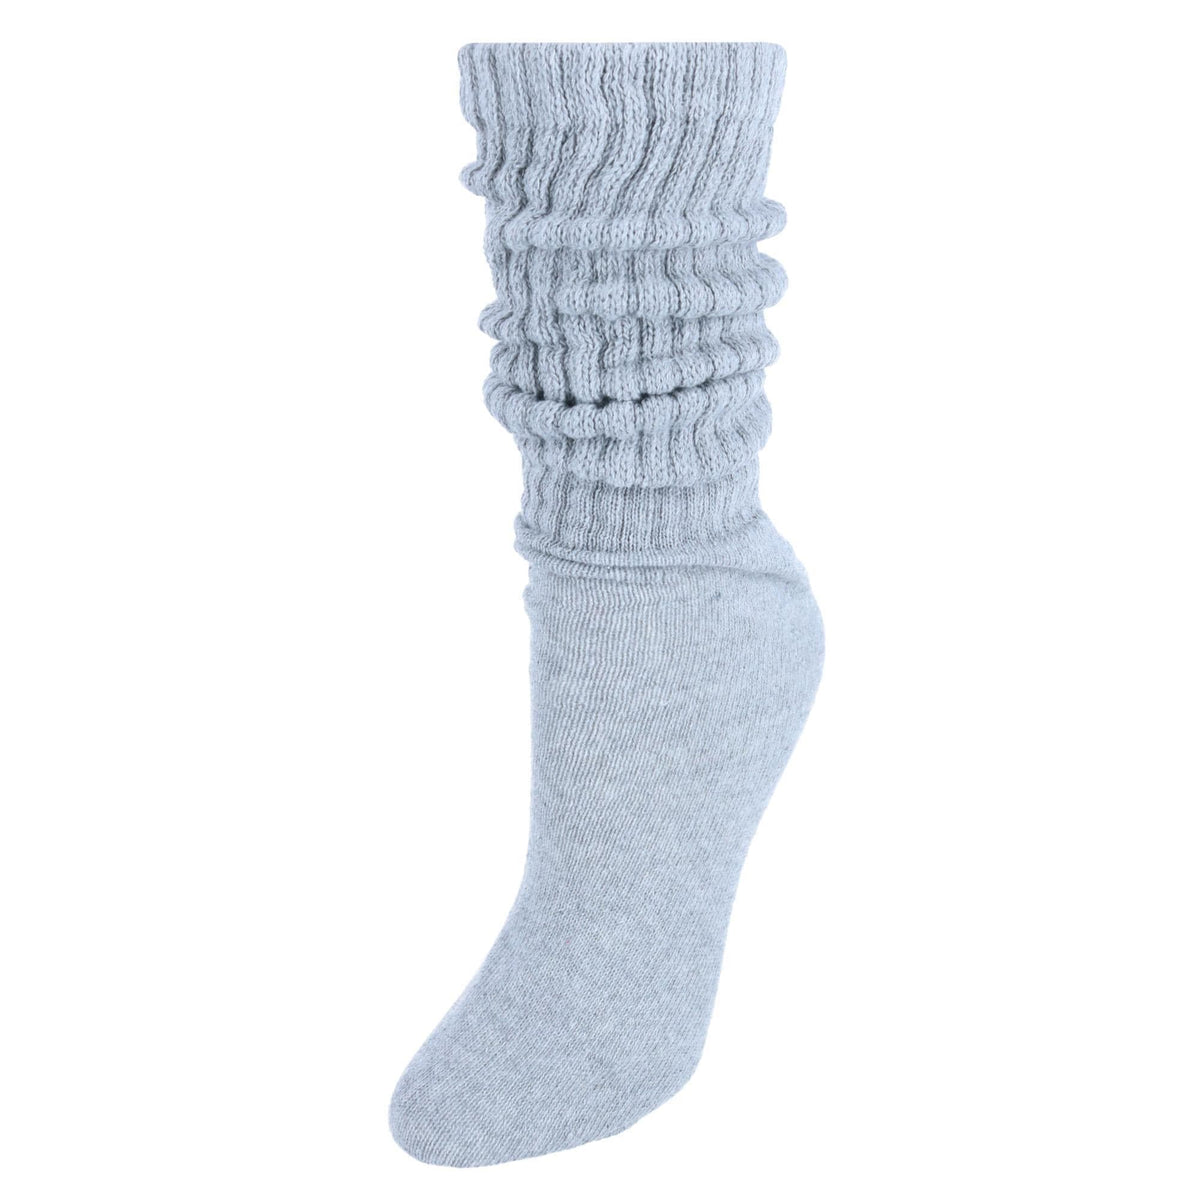 Women's Super Soft Slouch Socks (1 Pair) by CTM | Low Cut Socks at ...